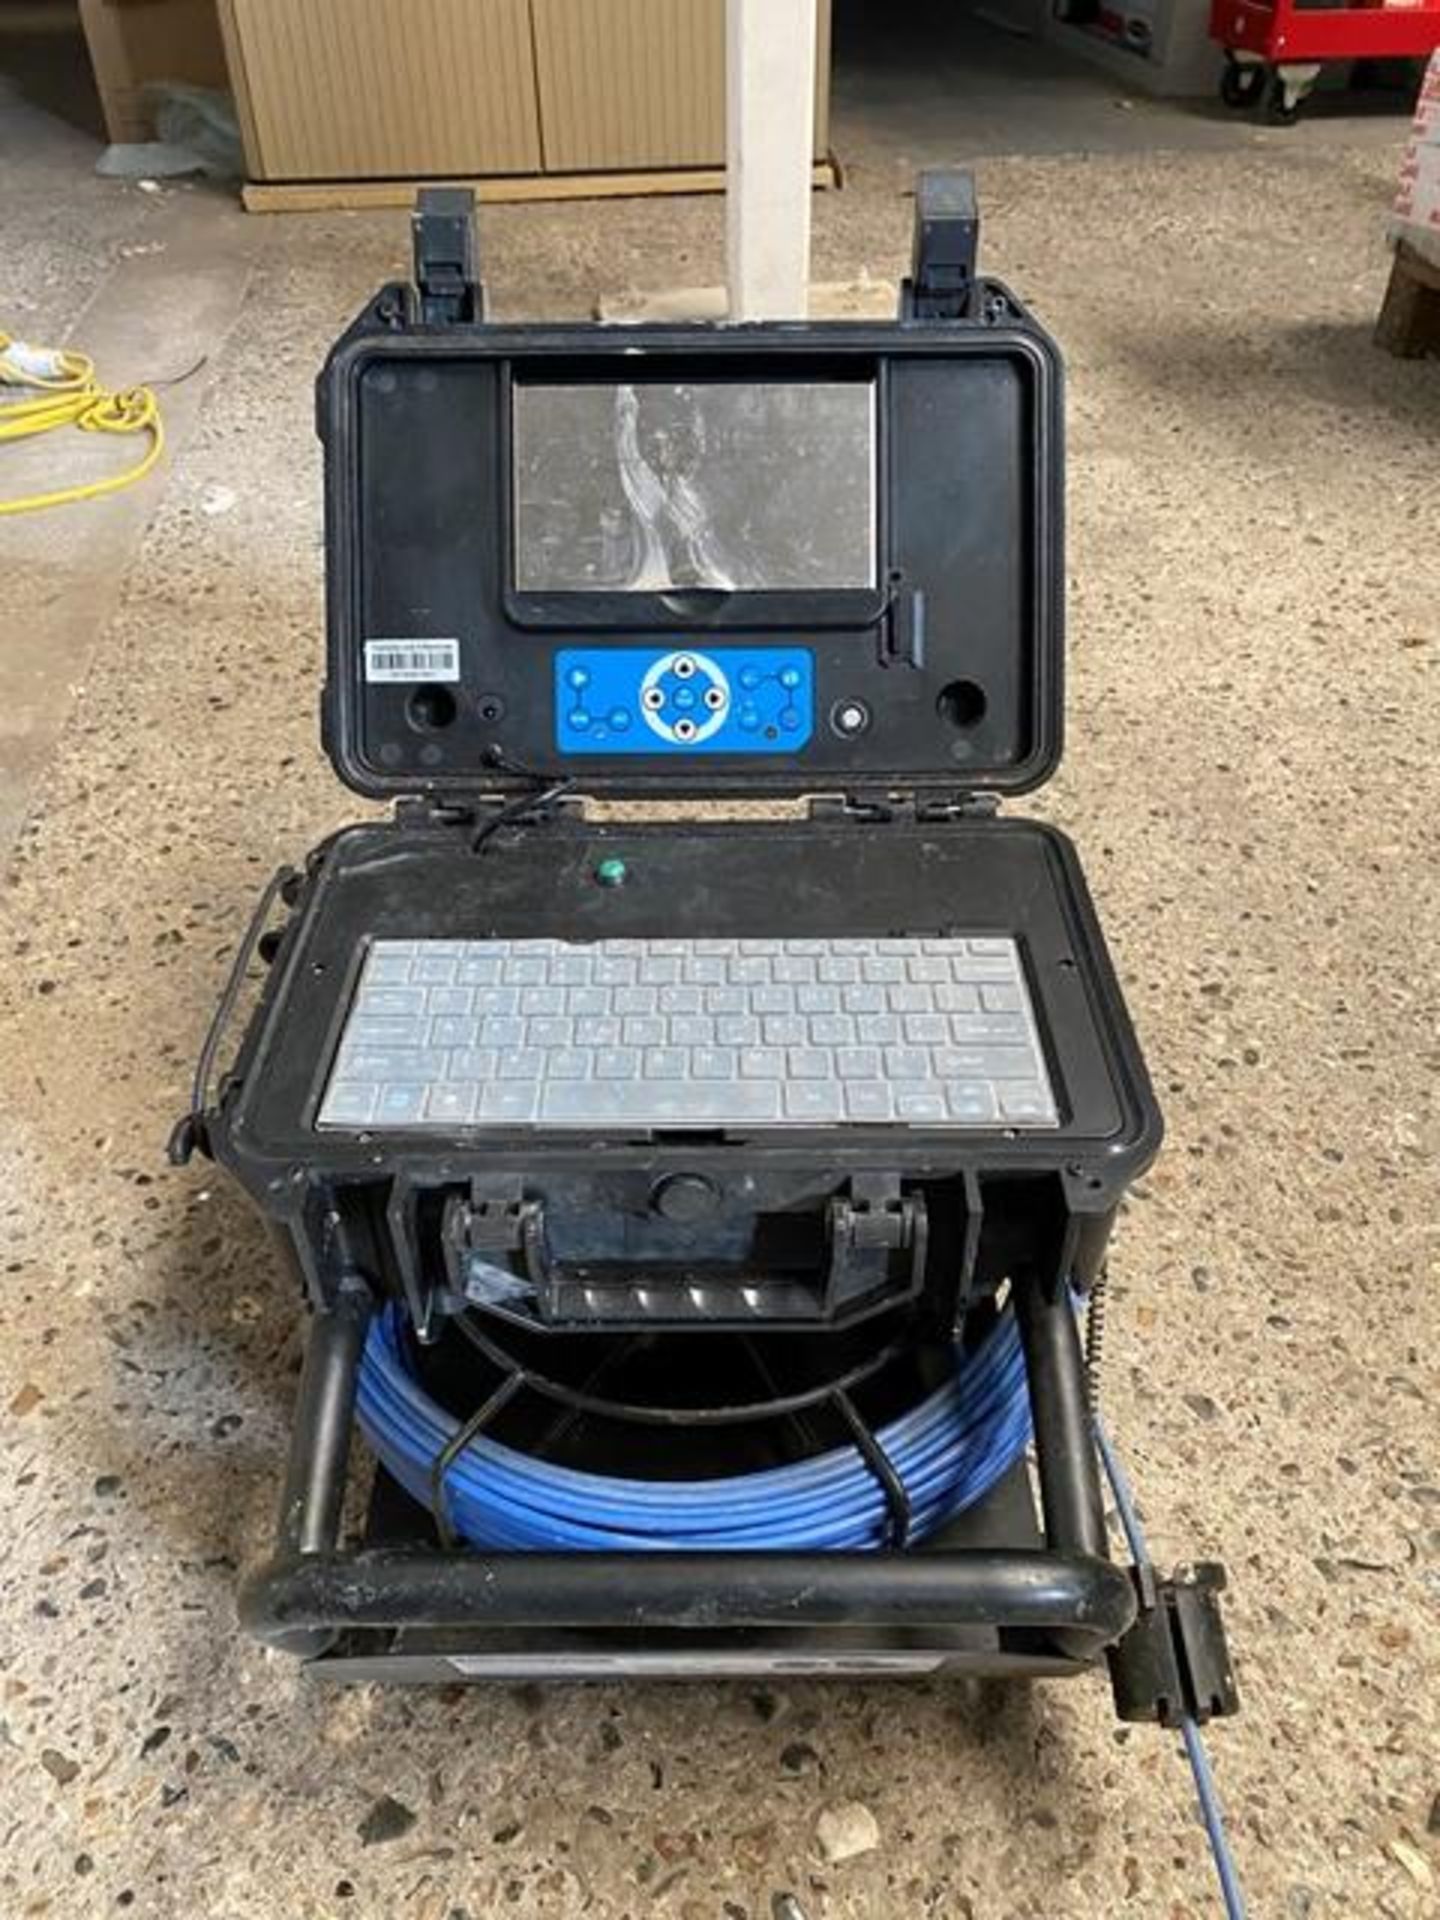 Drain pipe video inspection camera system complete with 40w fibreglass rod cable, IPX8 waterproof